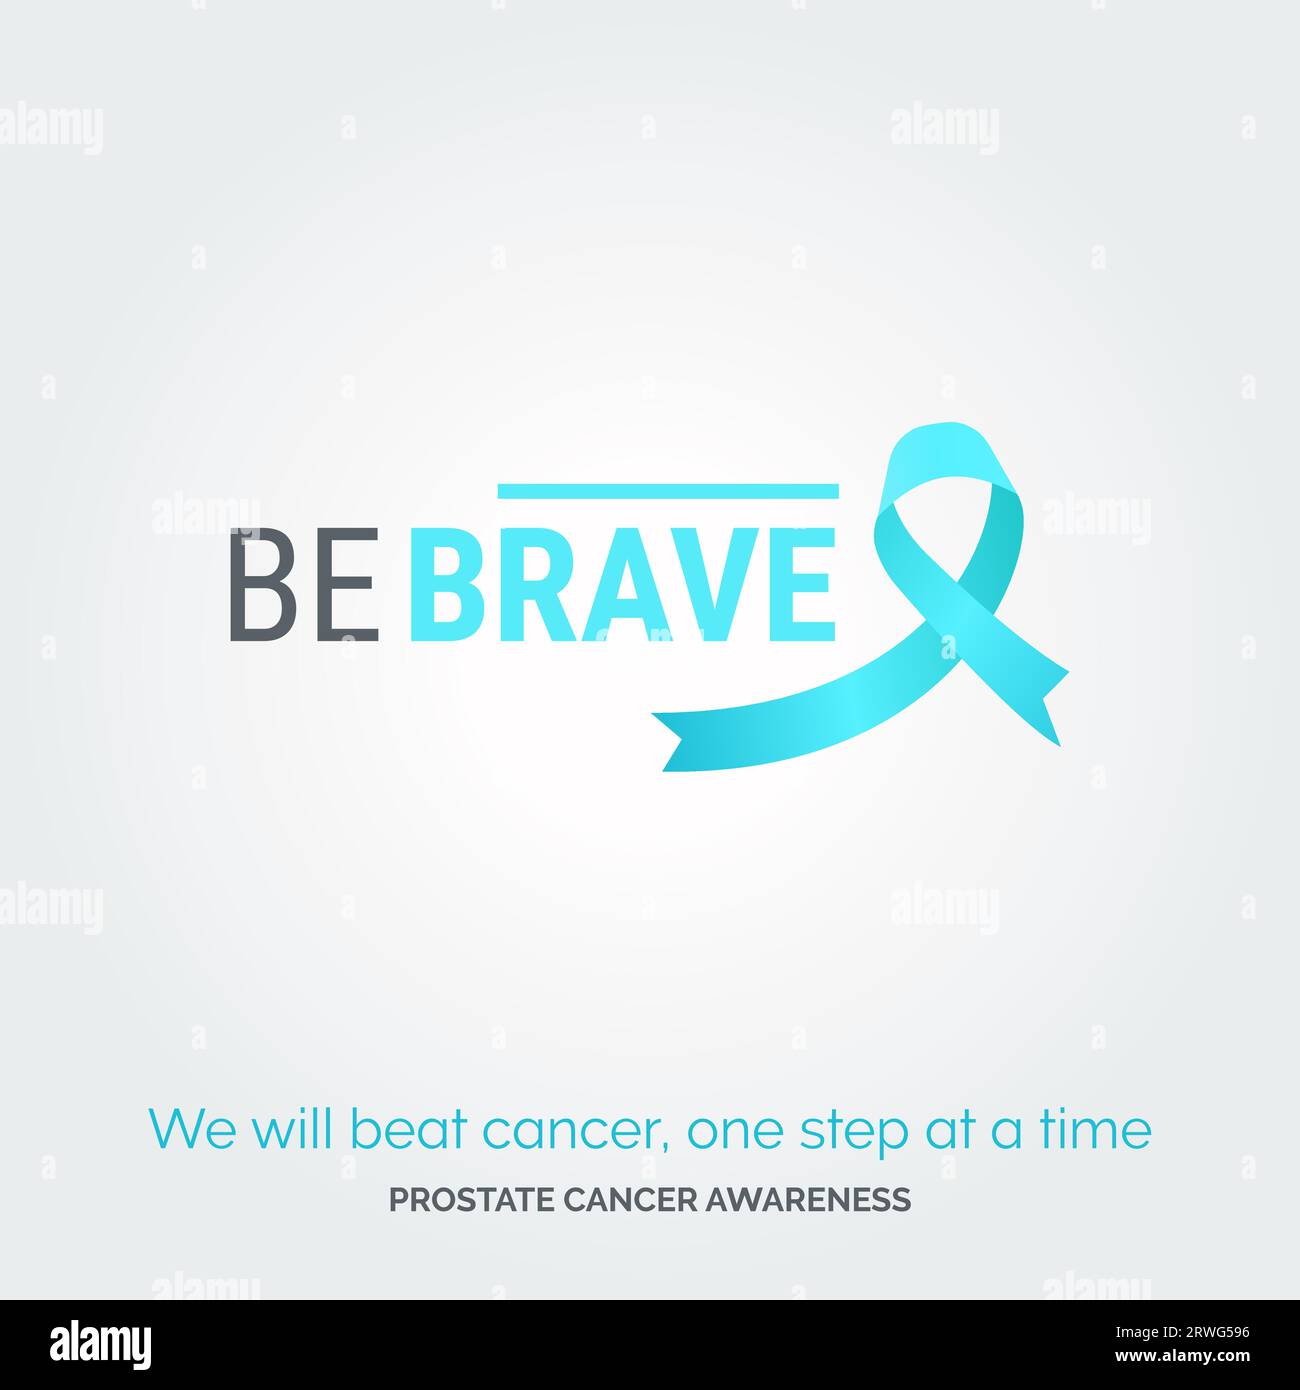 Designing Hope. Prostate Cancer Awareness Posters Stock Vector Image ...